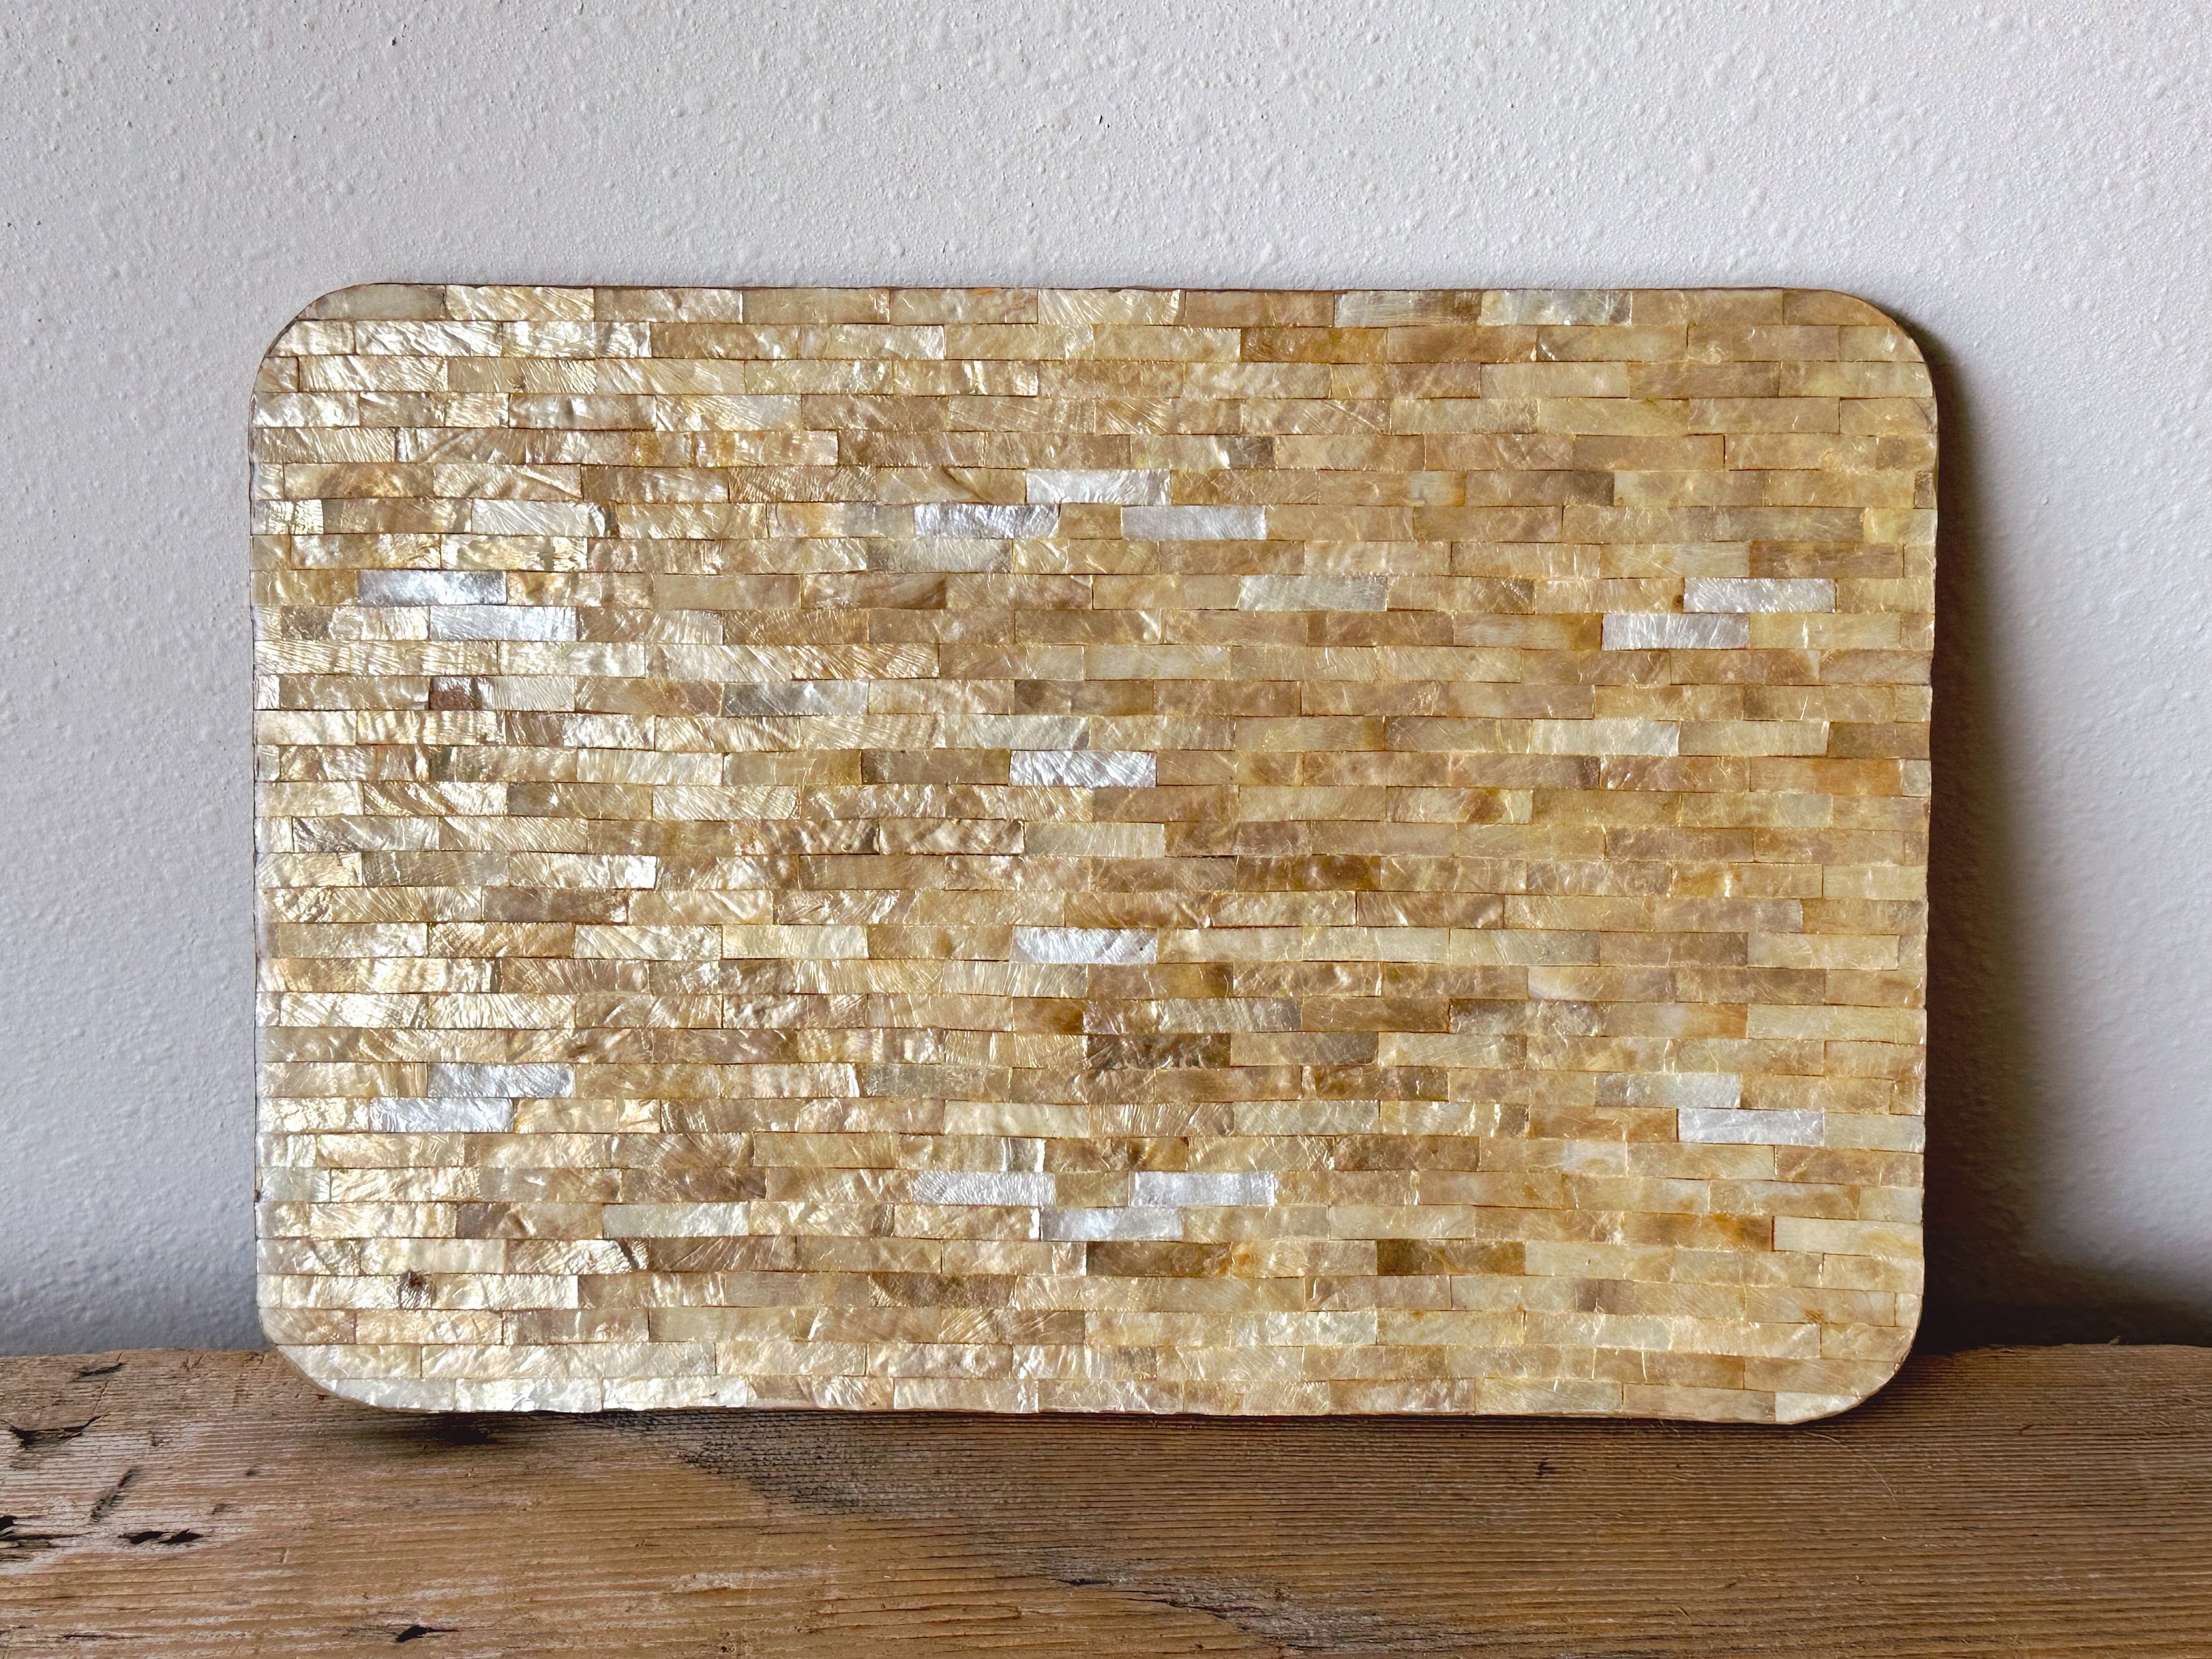 Vintage Mother Of Pearl Mosaic Rectangle Table Mat Placemat | Holiday Party Drink Serving Tray | Wedding Table Decor Housewarming Gift